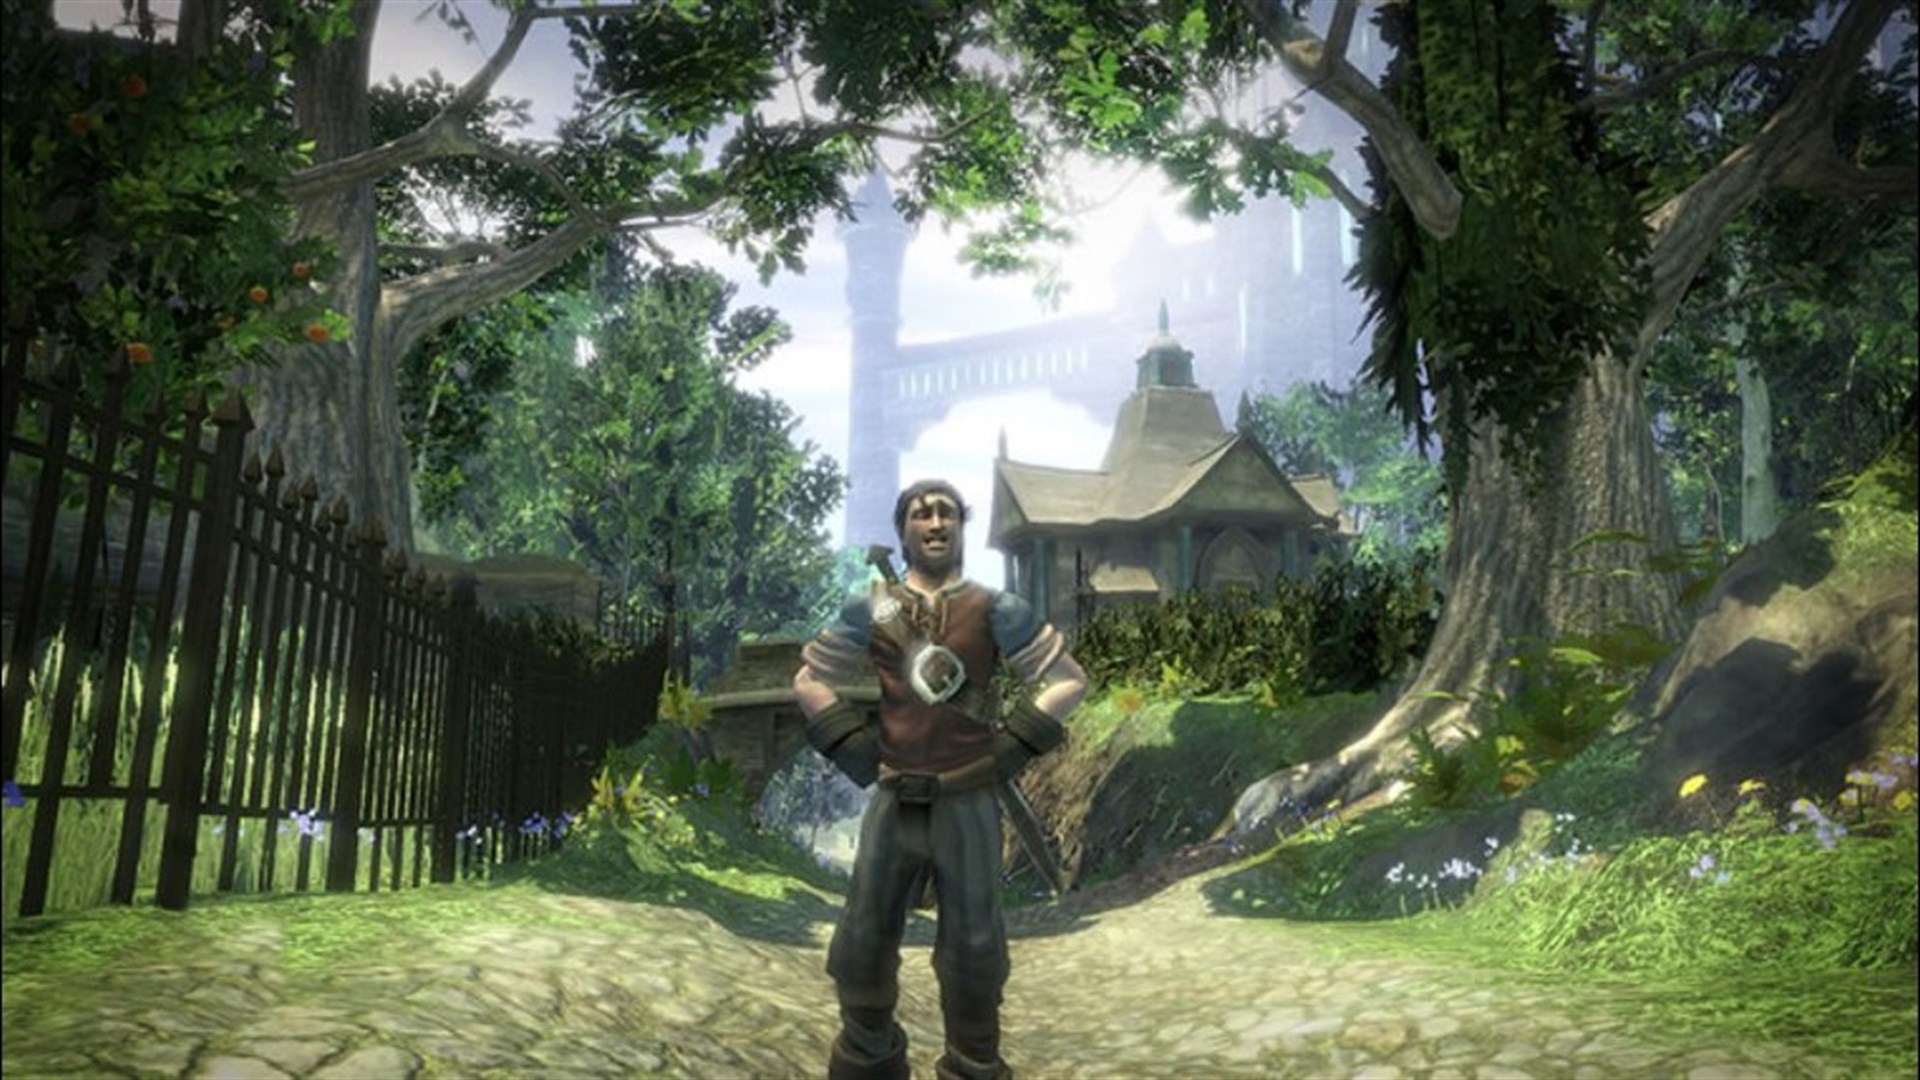 fable 2 xbox one